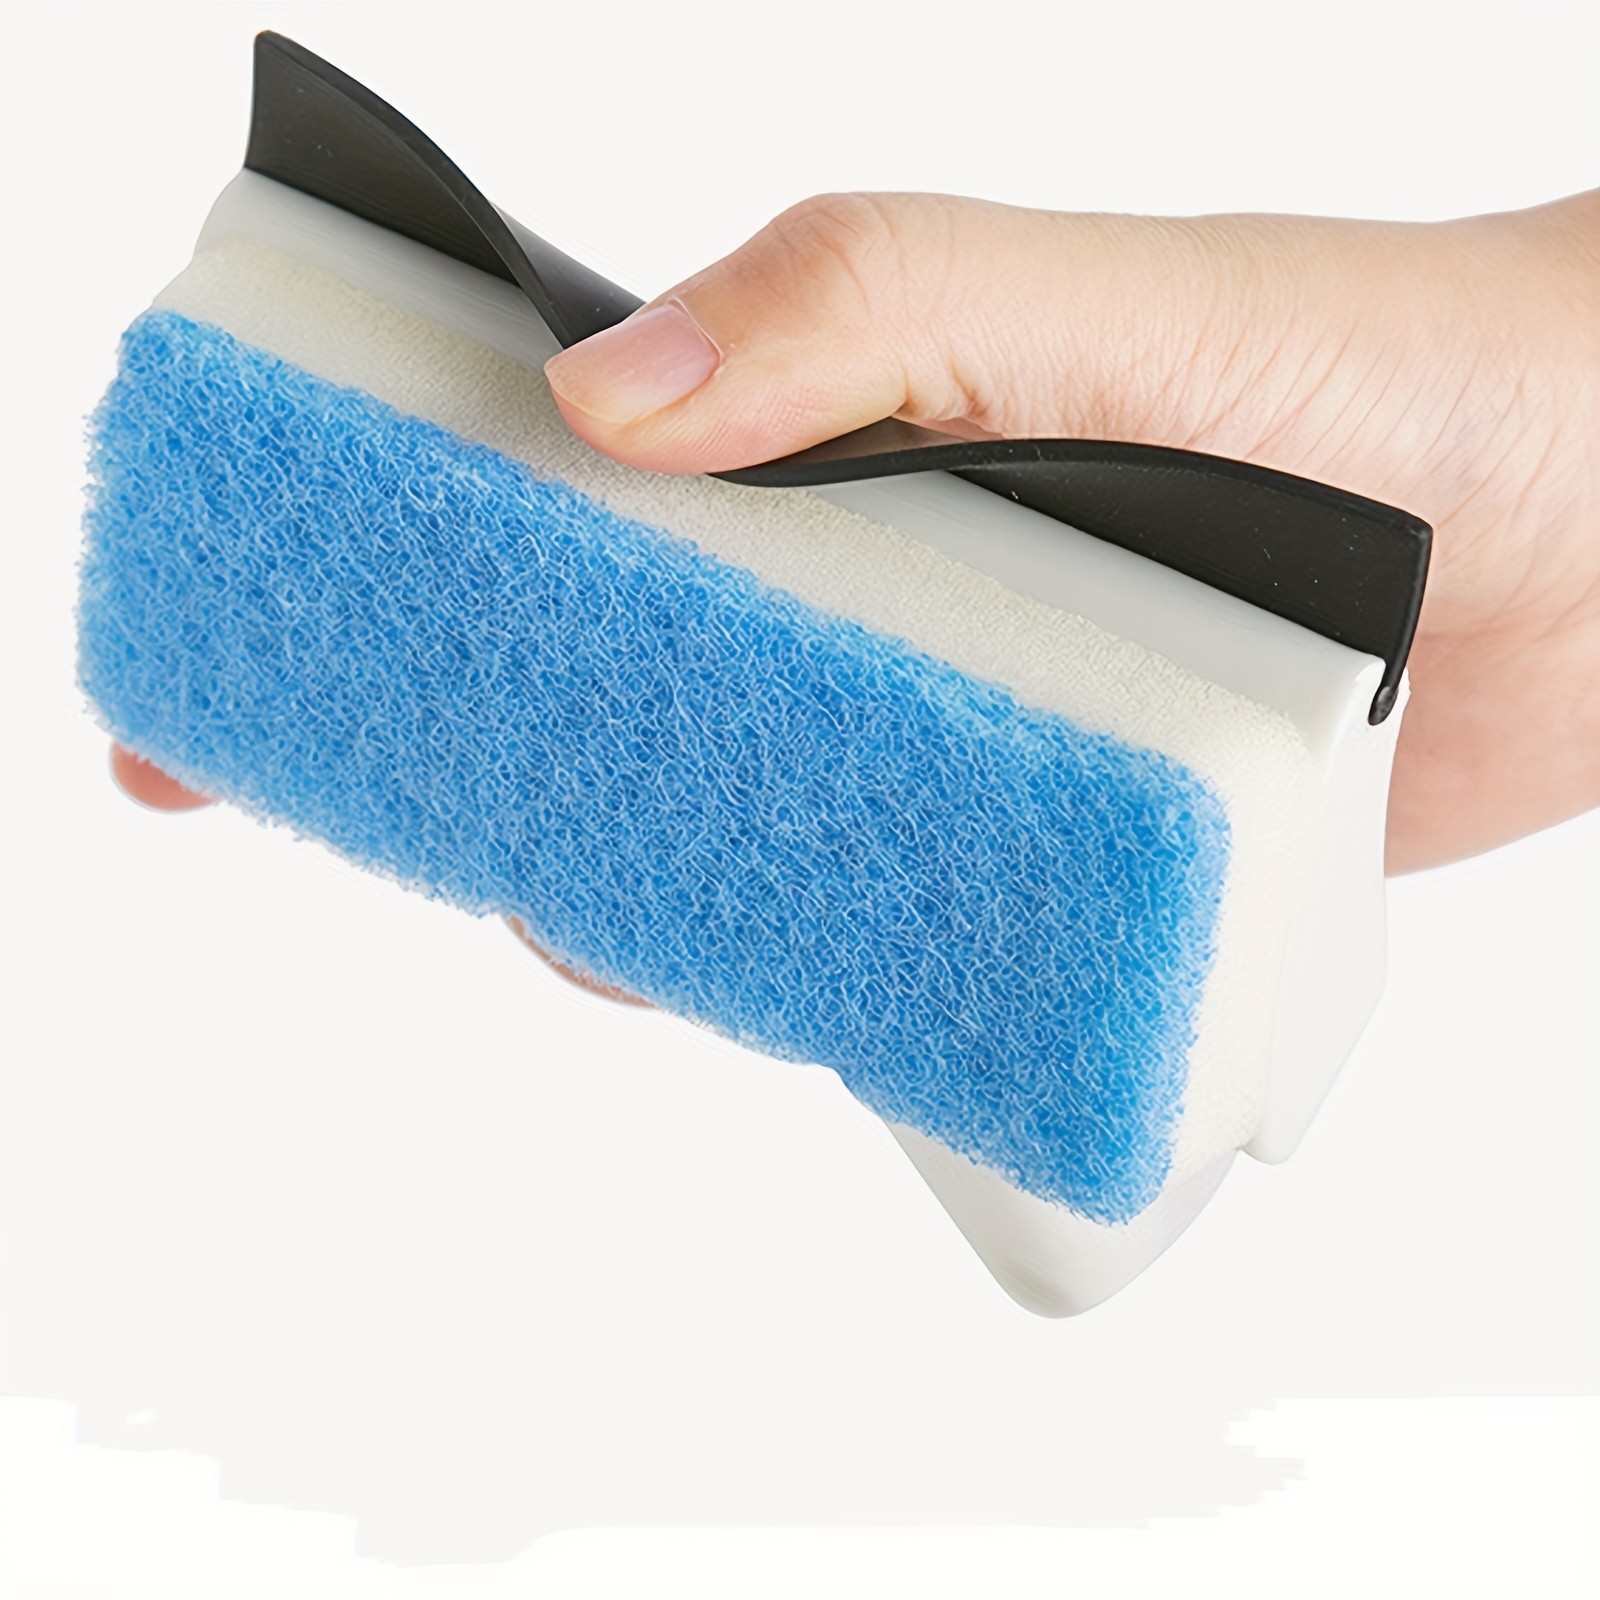 2 In 1 Professional All Purpose Window Squeegee For Car Windshield Shower  Door Boat Squeegee Dual Side Blade Rubber Scrubber Sponge, Shop The Latest  Trends